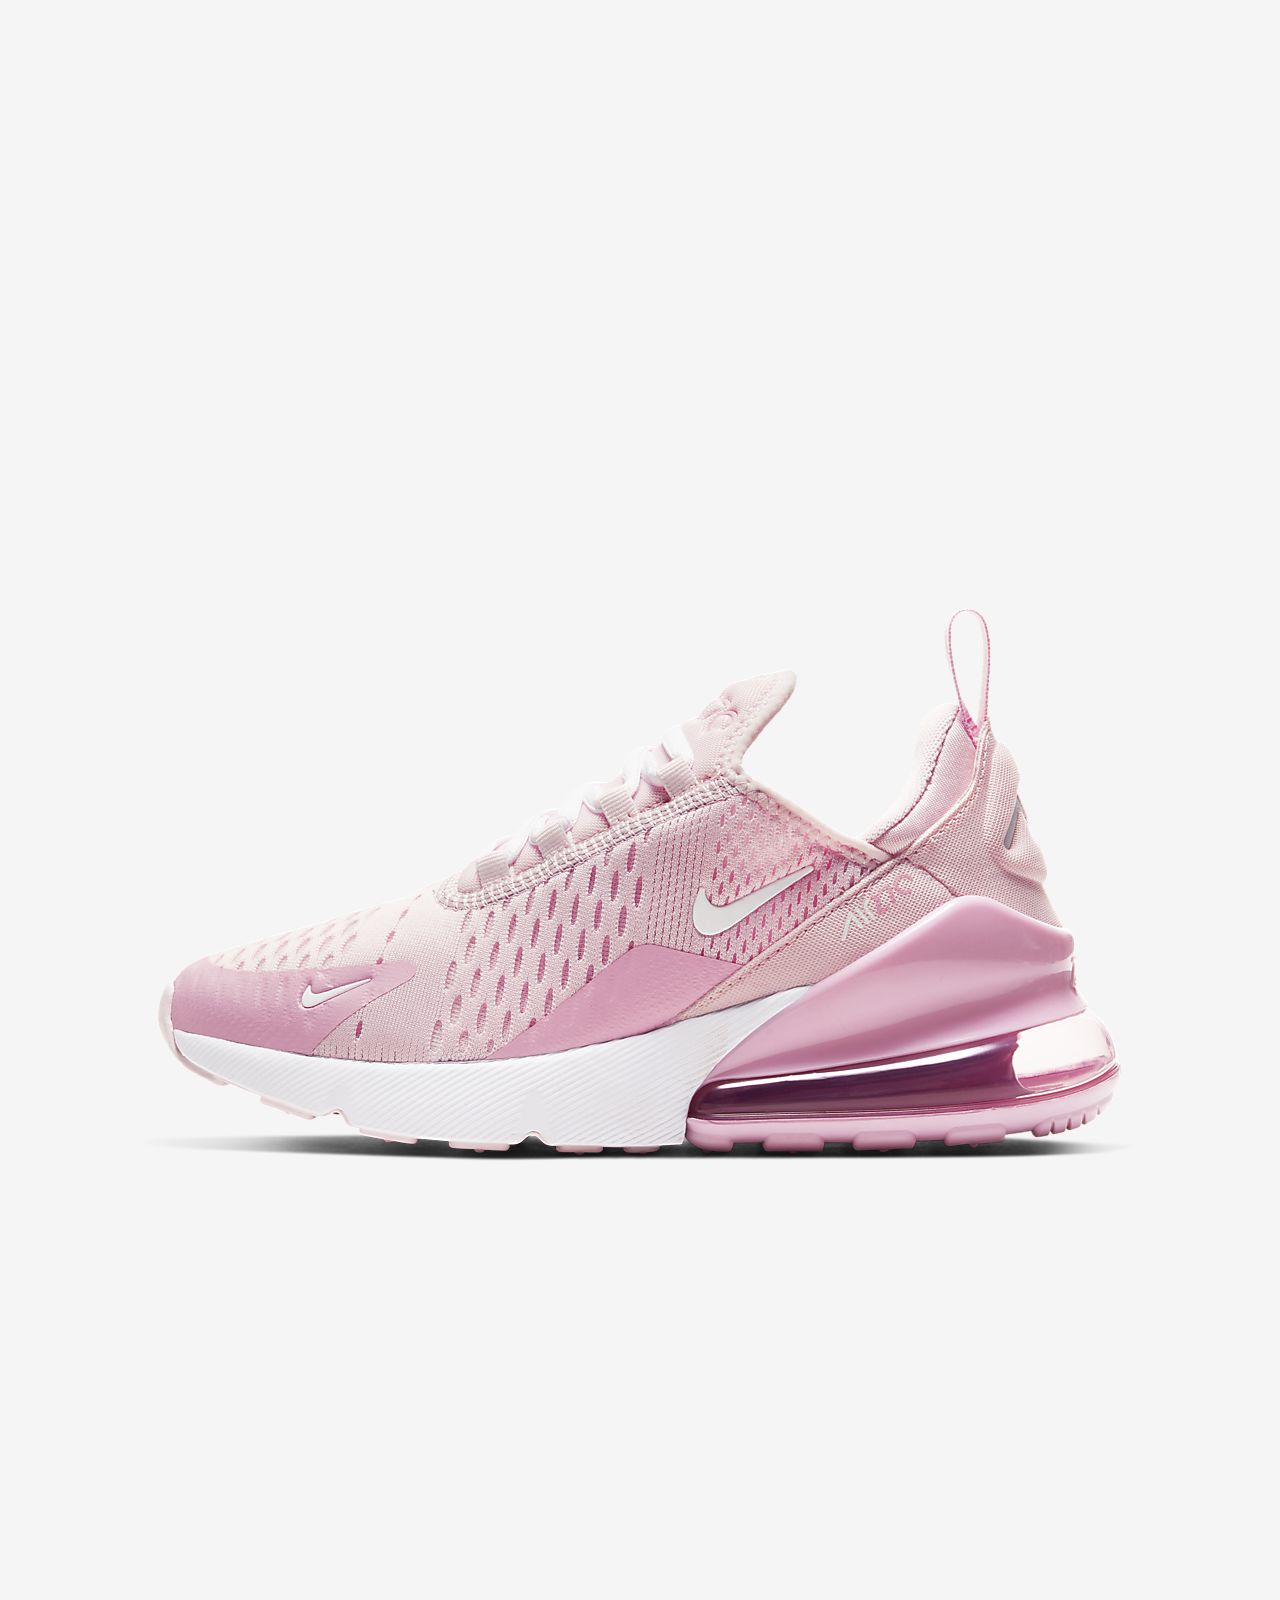 pink and grey nike 270